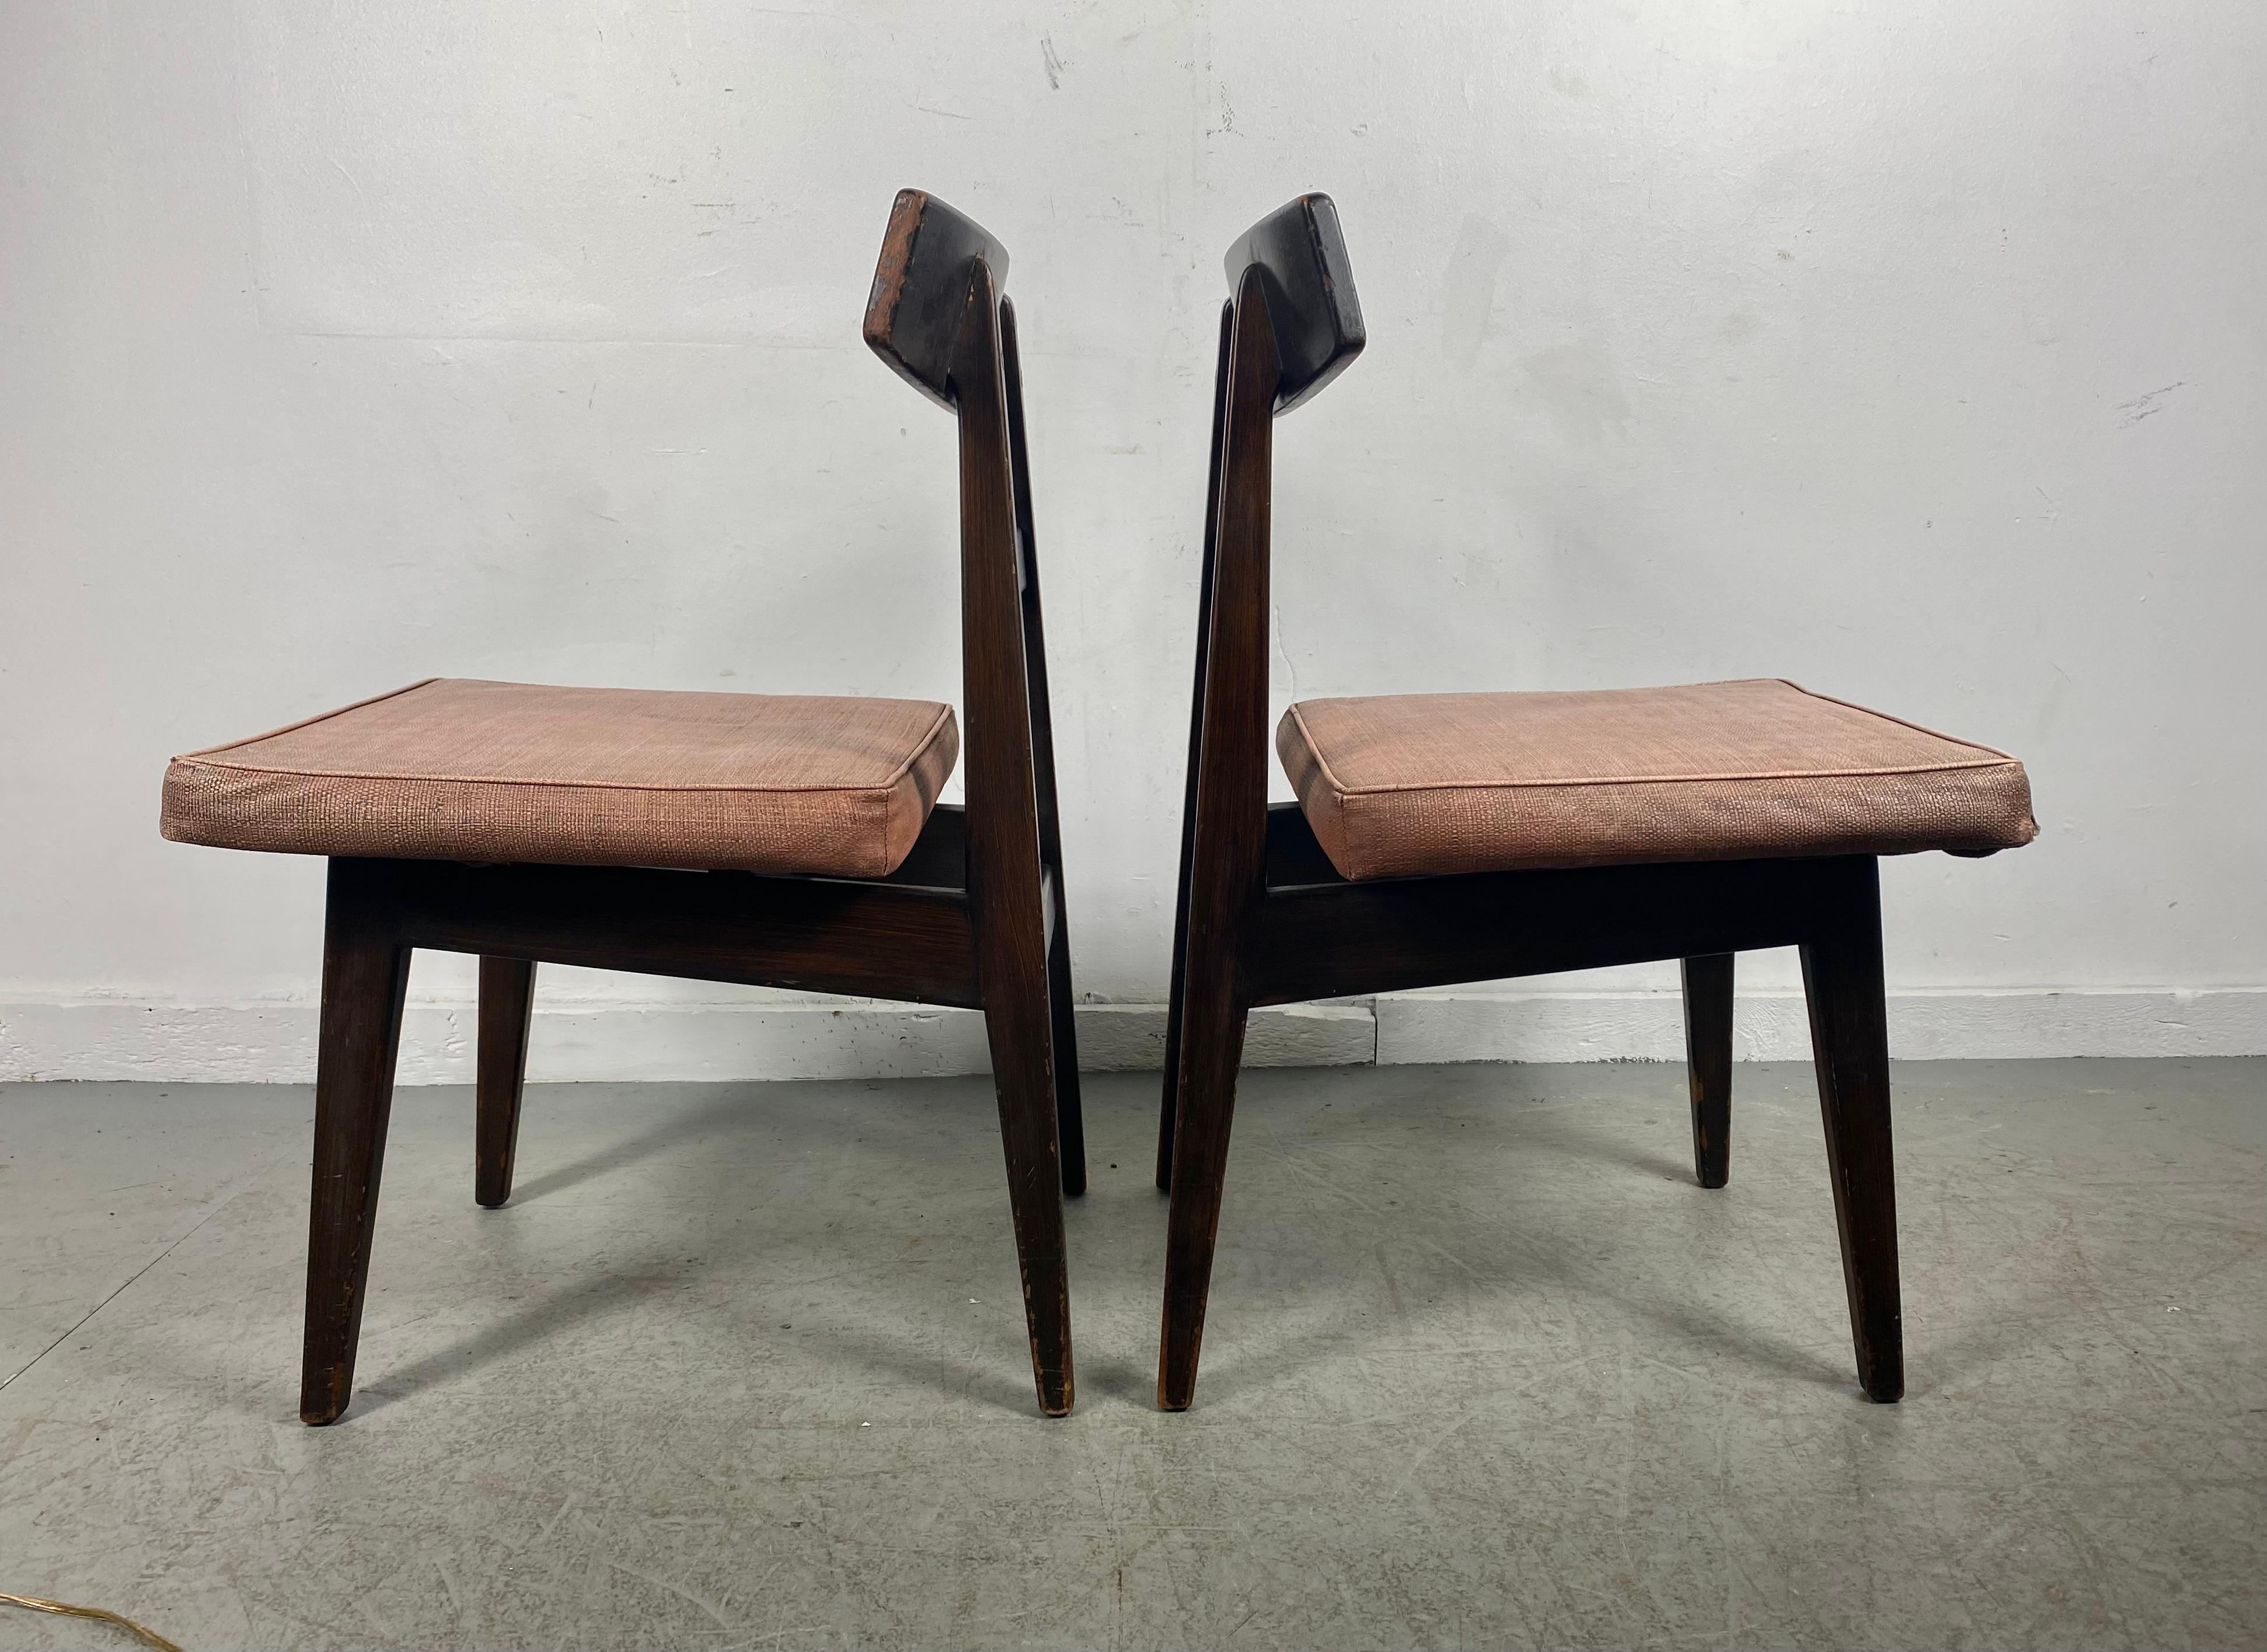 Extremely rare Asian inspired modernist side chairs designed by Jens Risom for jENS Risom Studios,,,, Could NOT find another example on the internet? Can possibly be found in a Jens Risom catalog,,, Amazing quality and design.. Retain original early